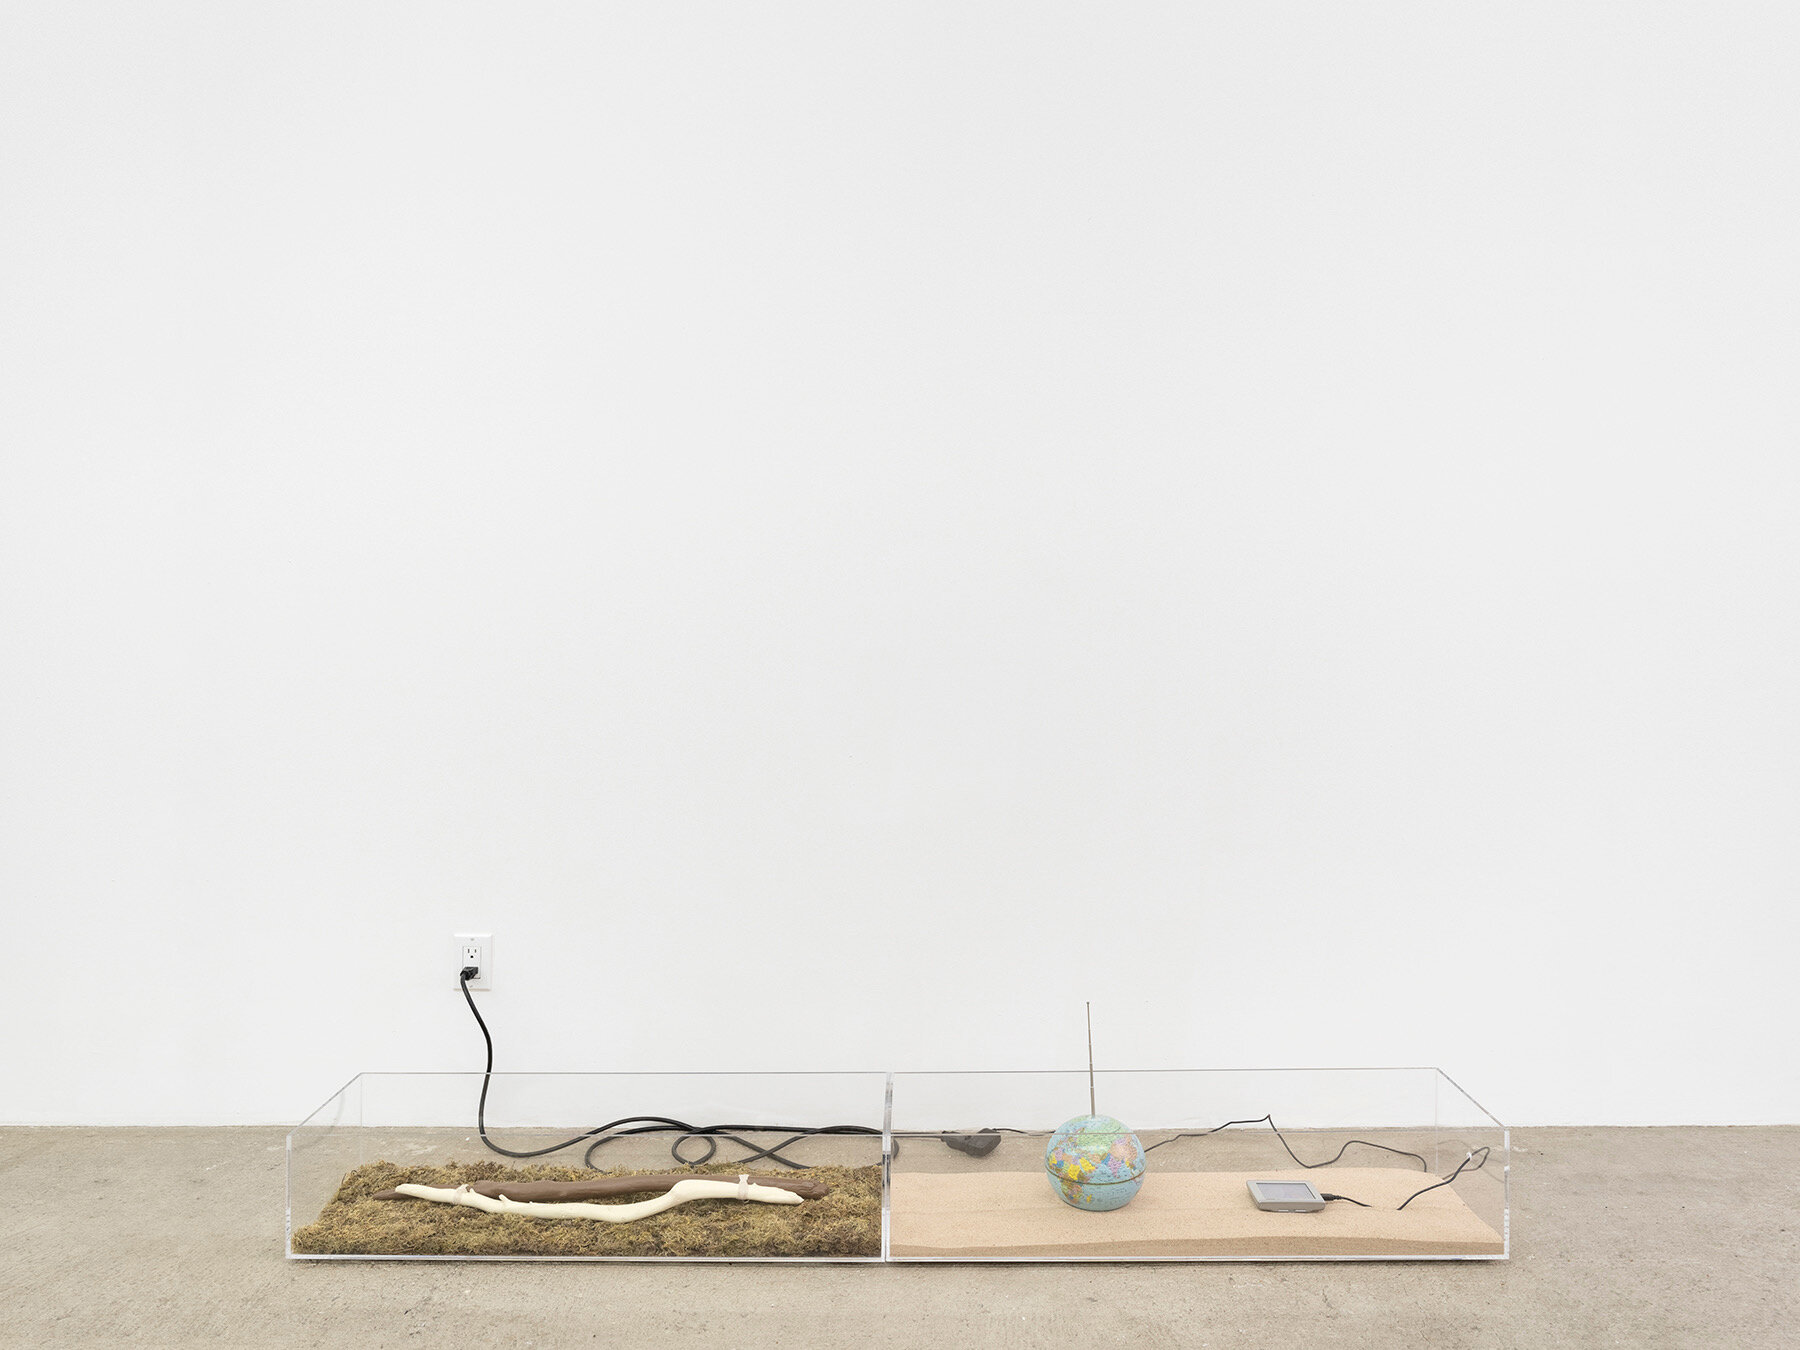  Connor McNicholas  The Meaning of a Word is a Bunch of Other Words , 2020 Plexiglass, Polyamide, GPS, moss, sand, globe,  antenna, stone, cables, electricity 9 x 68 x 10 inches (23 x 173 x 25 cm) 